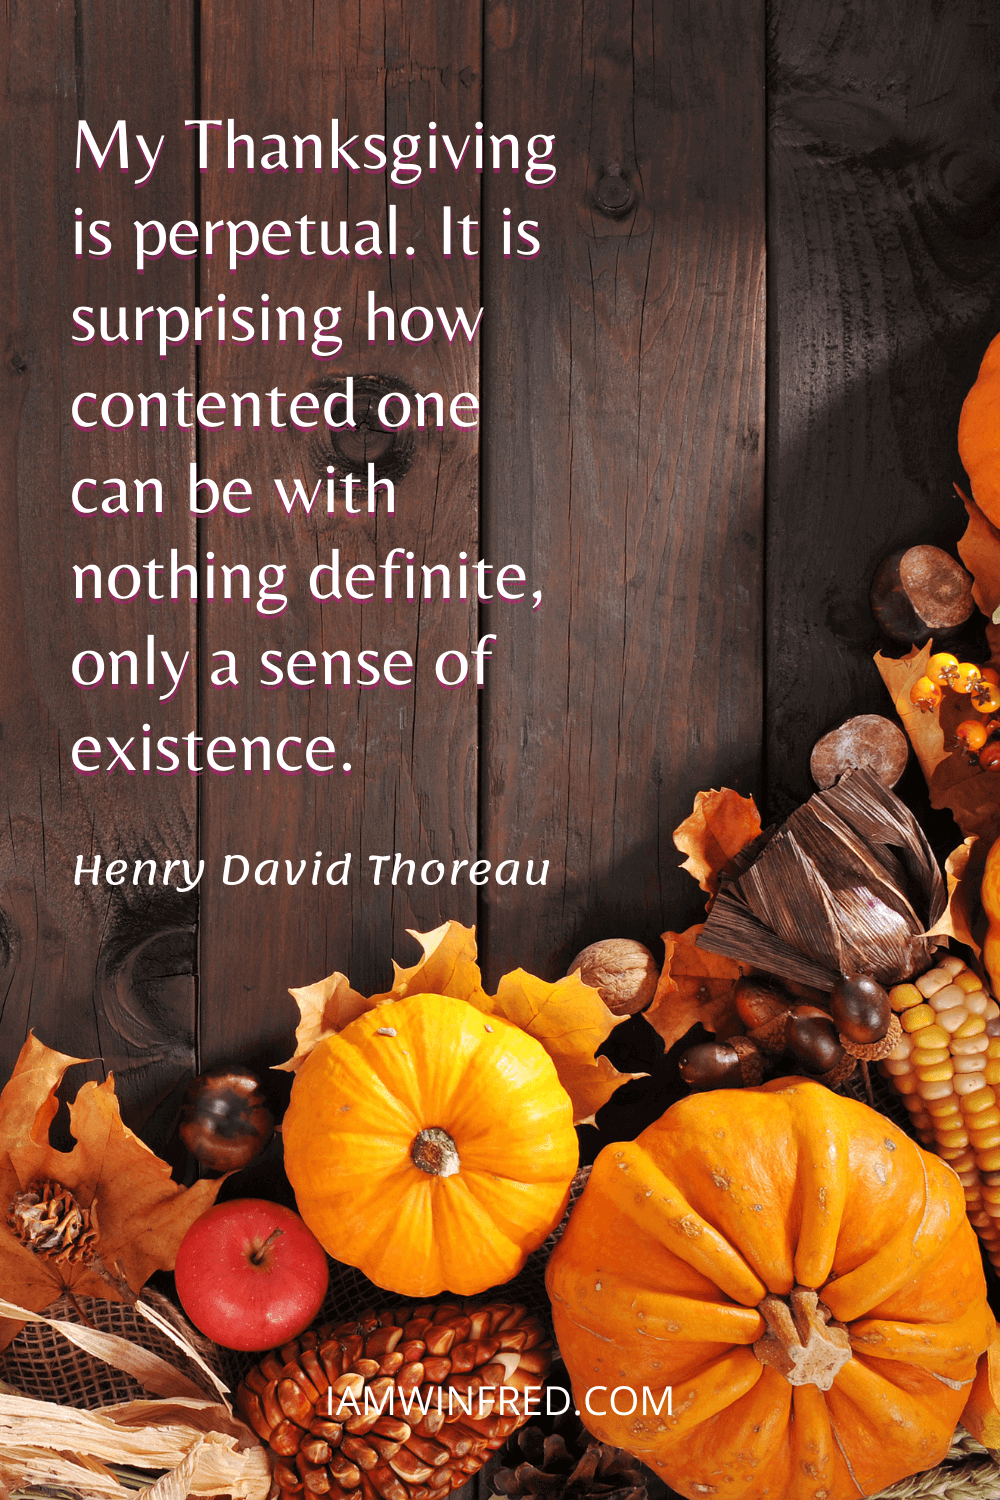 My Thanksgiving Is Perpetual. It Is Surprising How Contented One Can Be With Nothing Definite Only A Sense Of